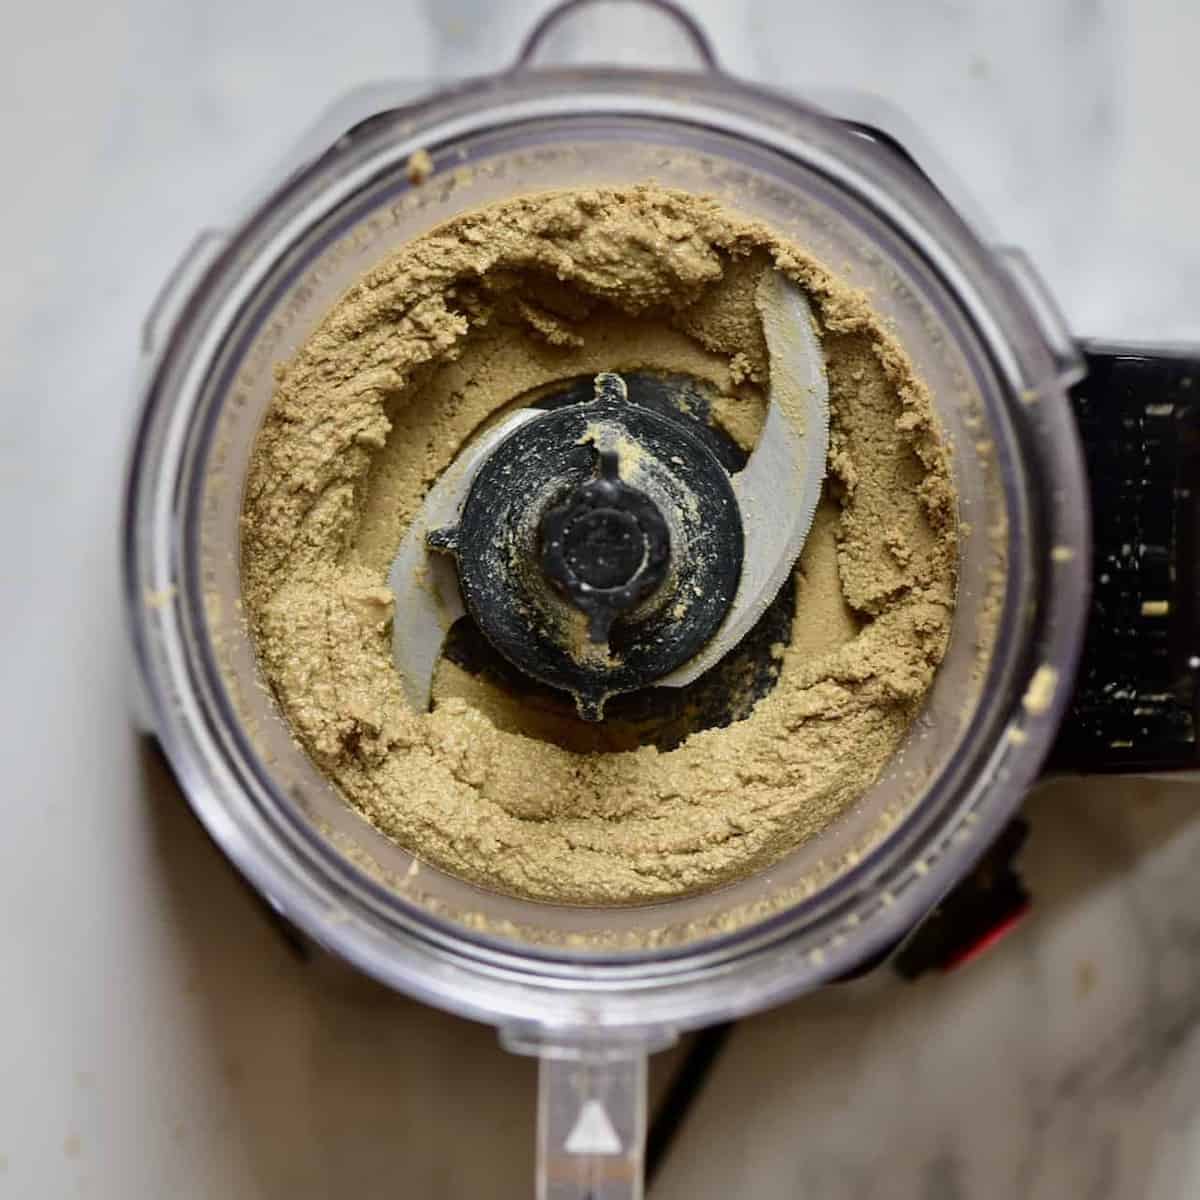 A delicious one ingredient sunflower seed butter recipe (sunbutter). Plus the health benefits of sunflower seeds, flavoured sunflower seed butter options and sunflower seed butter uses & recipes!